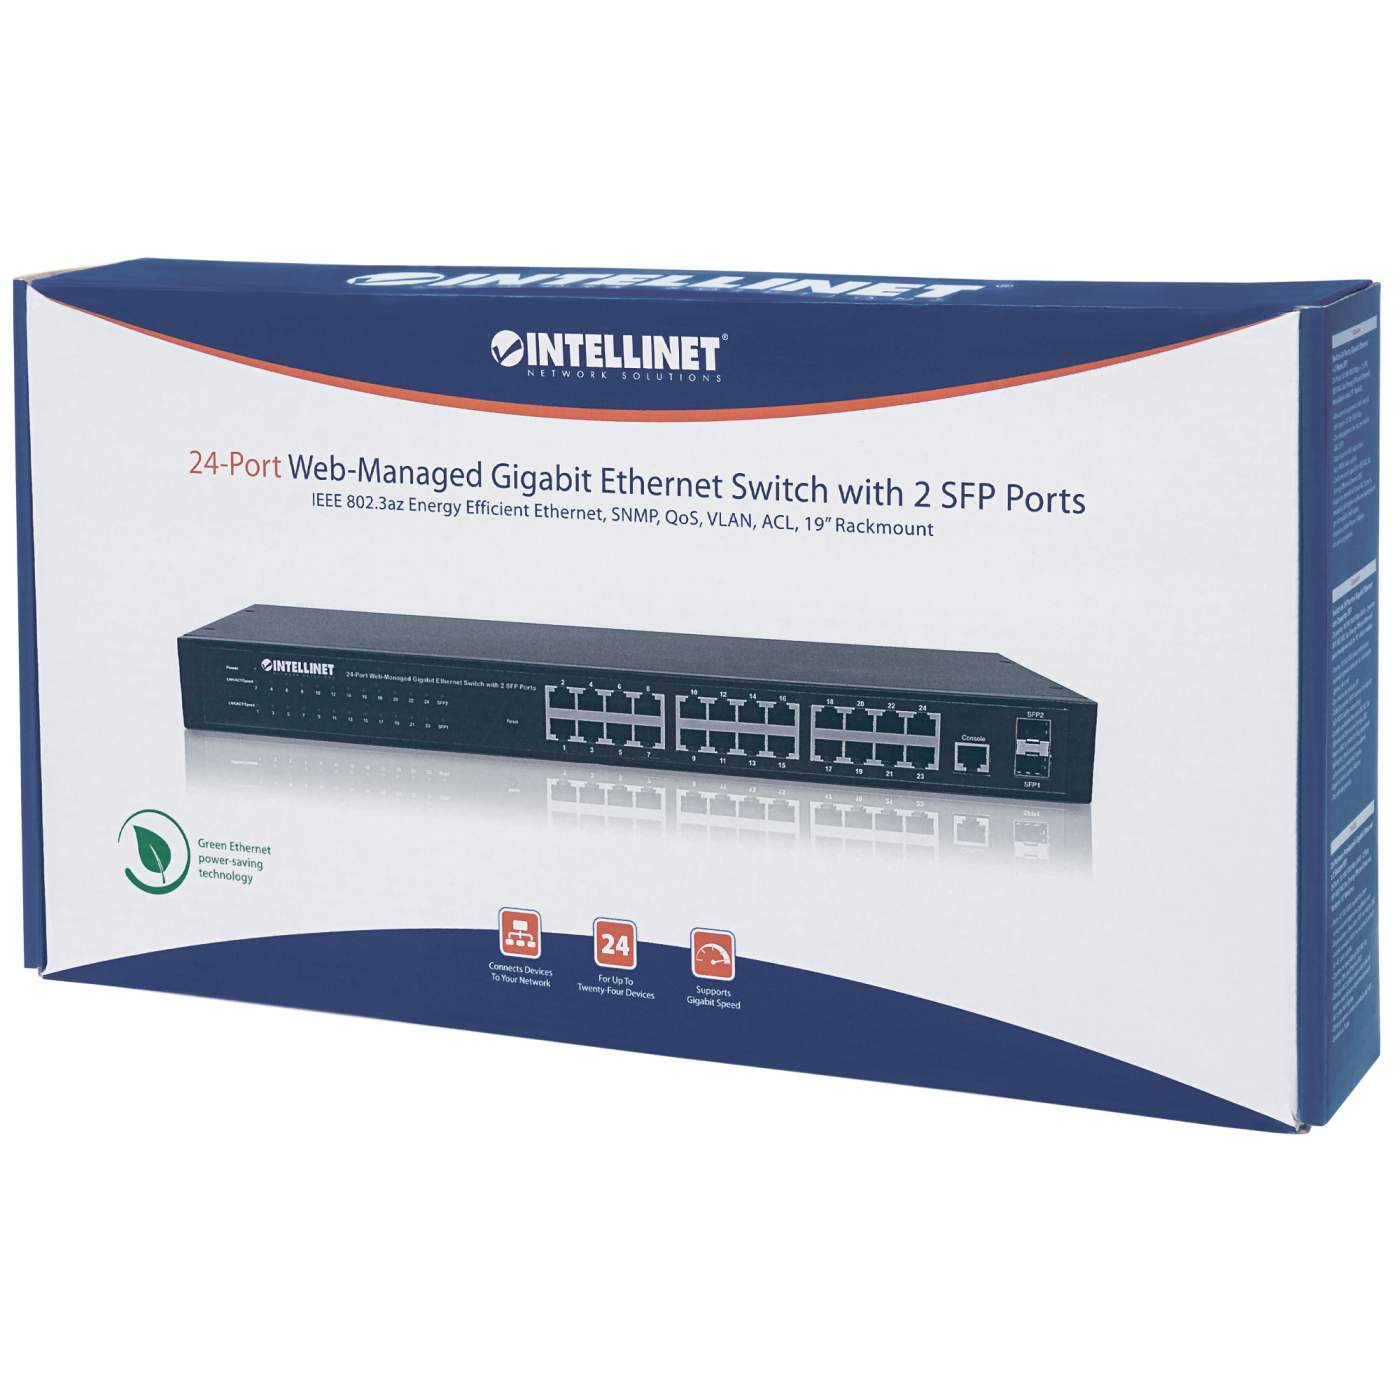 24-Port Web-Managed Gigabit Ethernet Switch with 2 SFP Ports Packaging Image 2